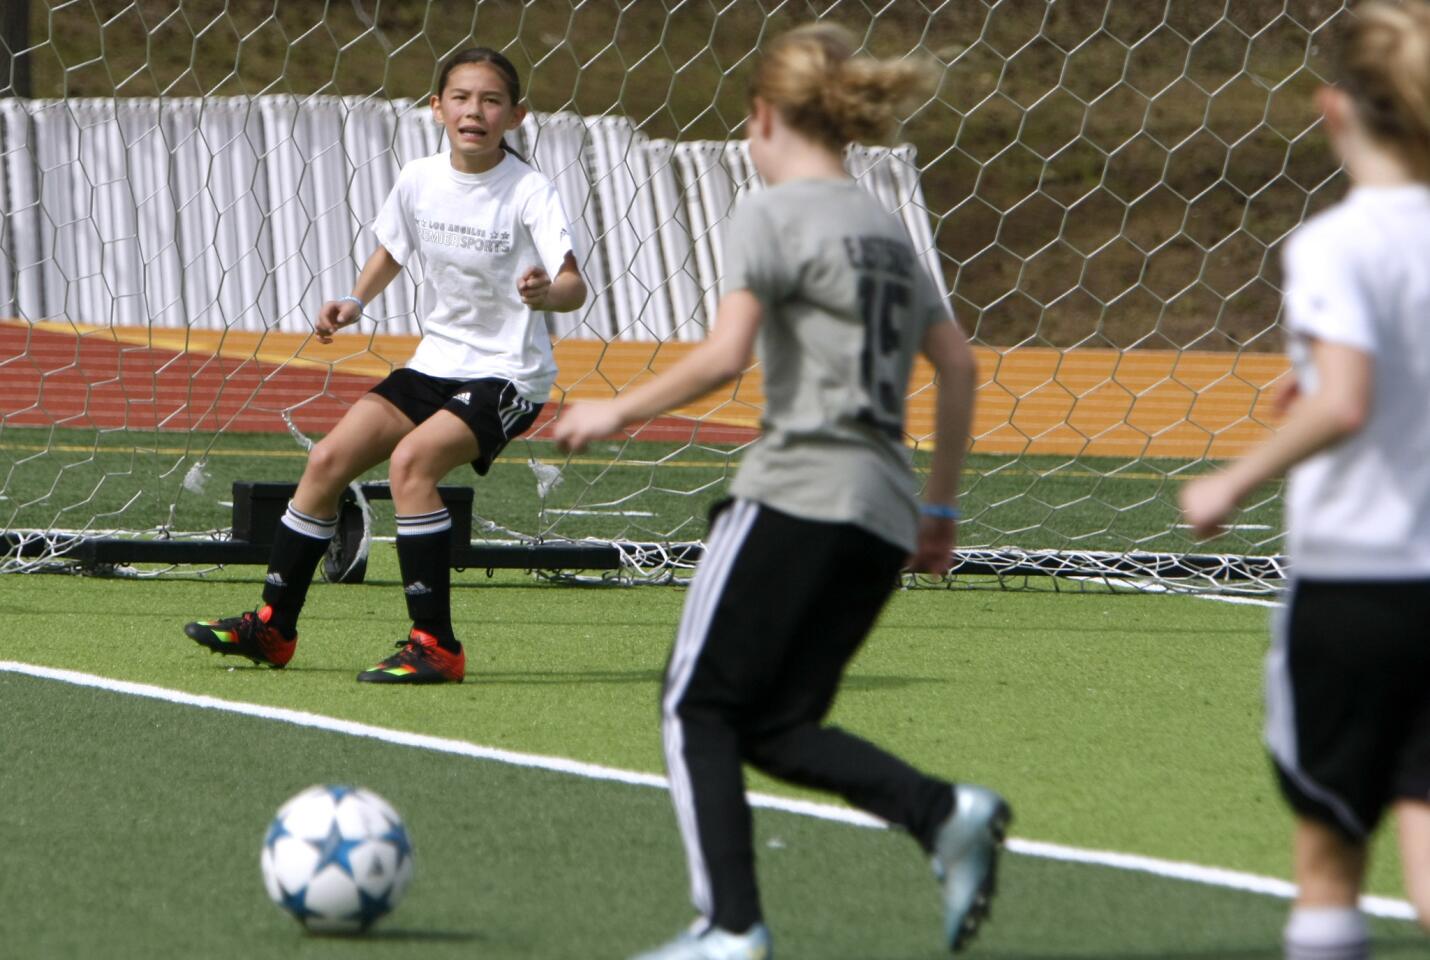 Paradise Canyon Elementary School fifth grader Montana Labarge, on goal at left, organized Kick 4 a Cure at the La Cañada High School soccer field in La Cañada Flintridge on Saturday, March 4, 2017. The event was a two-hour soccer game fundraiser to raise money for breast cancer research at the City of Hope.